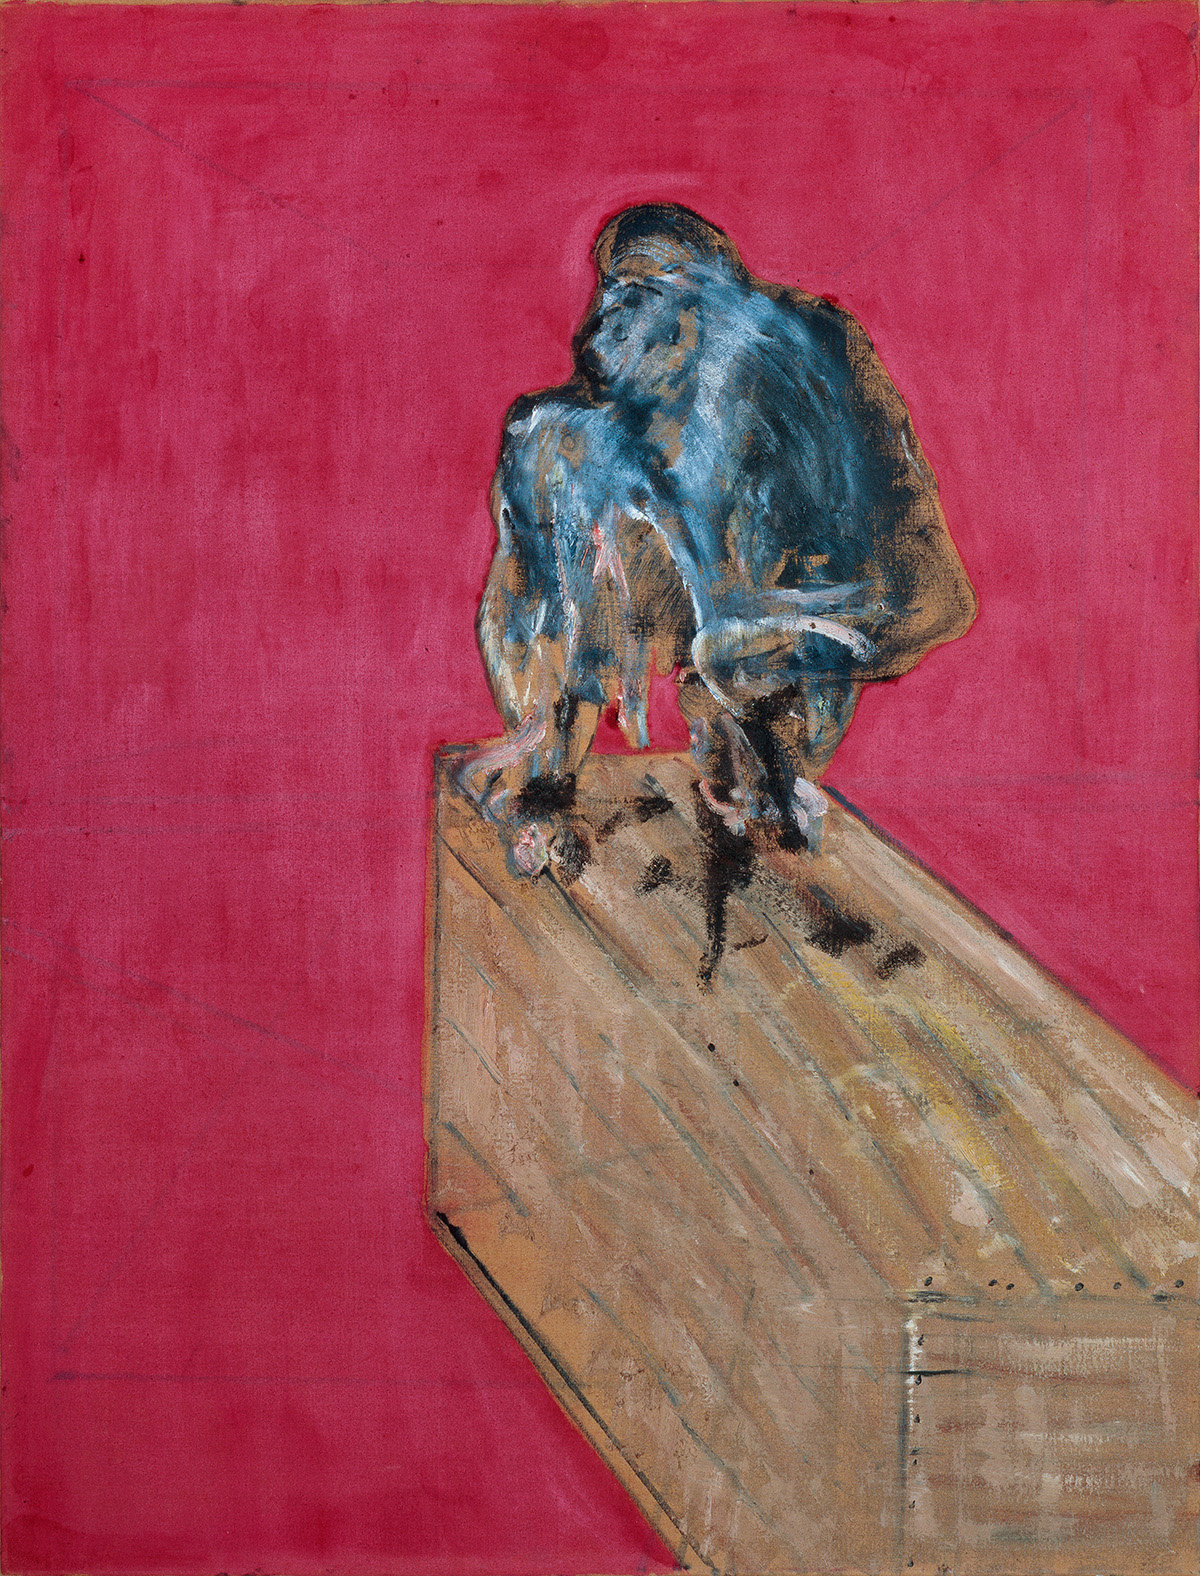 Francis Bacon, Study for Chimpanzee, 1957. Oil on canvas. CR number 57-09. © The Estate of Francis Bacon / DACS London 2019. All rights reserved.